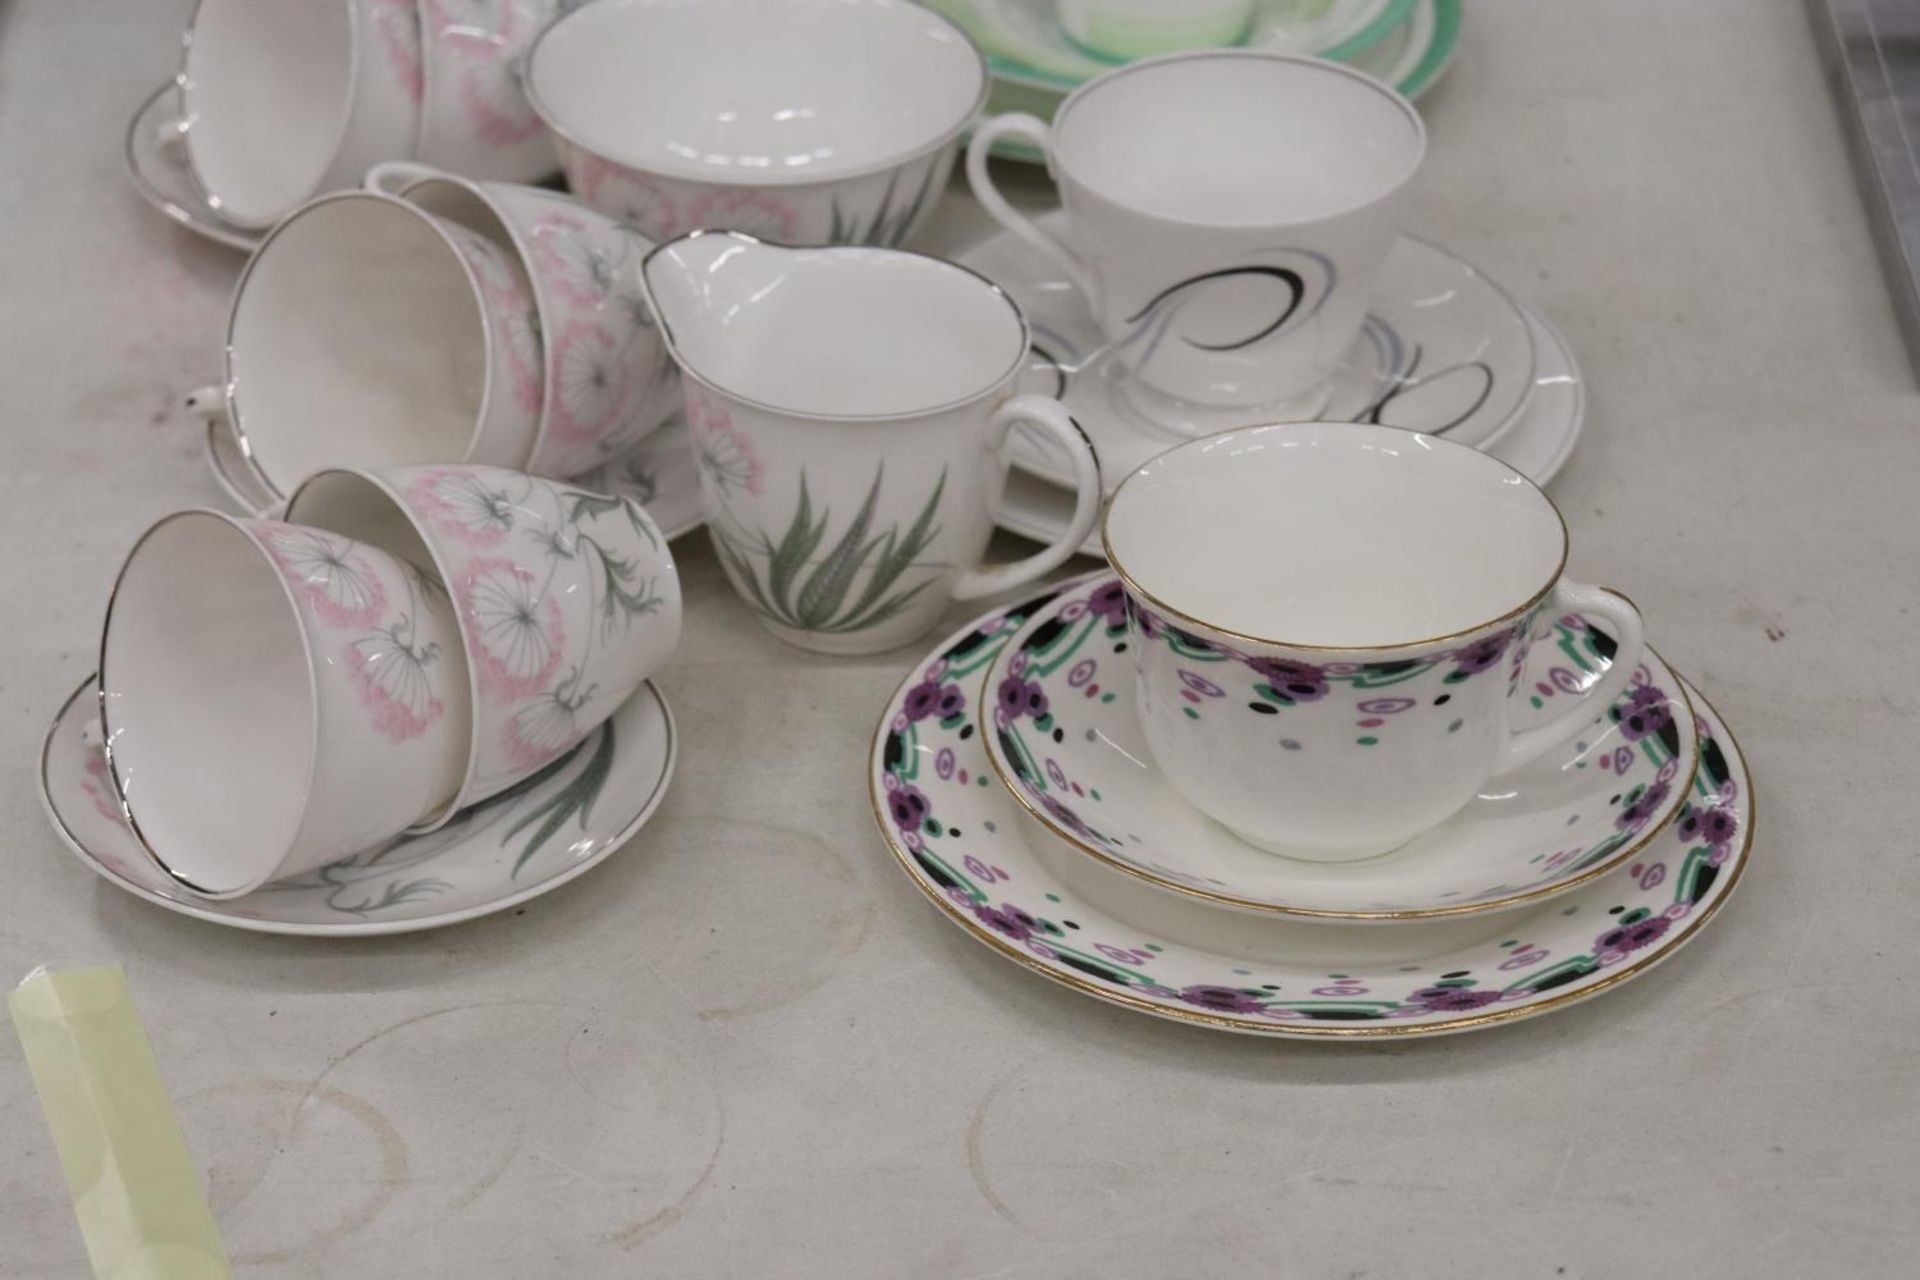 A MIXED LOT OF SHELLEY TEAWARE TO INCLUDE A TEA POT, CUPS, SAUCERS, JUG ETC - Image 2 of 6